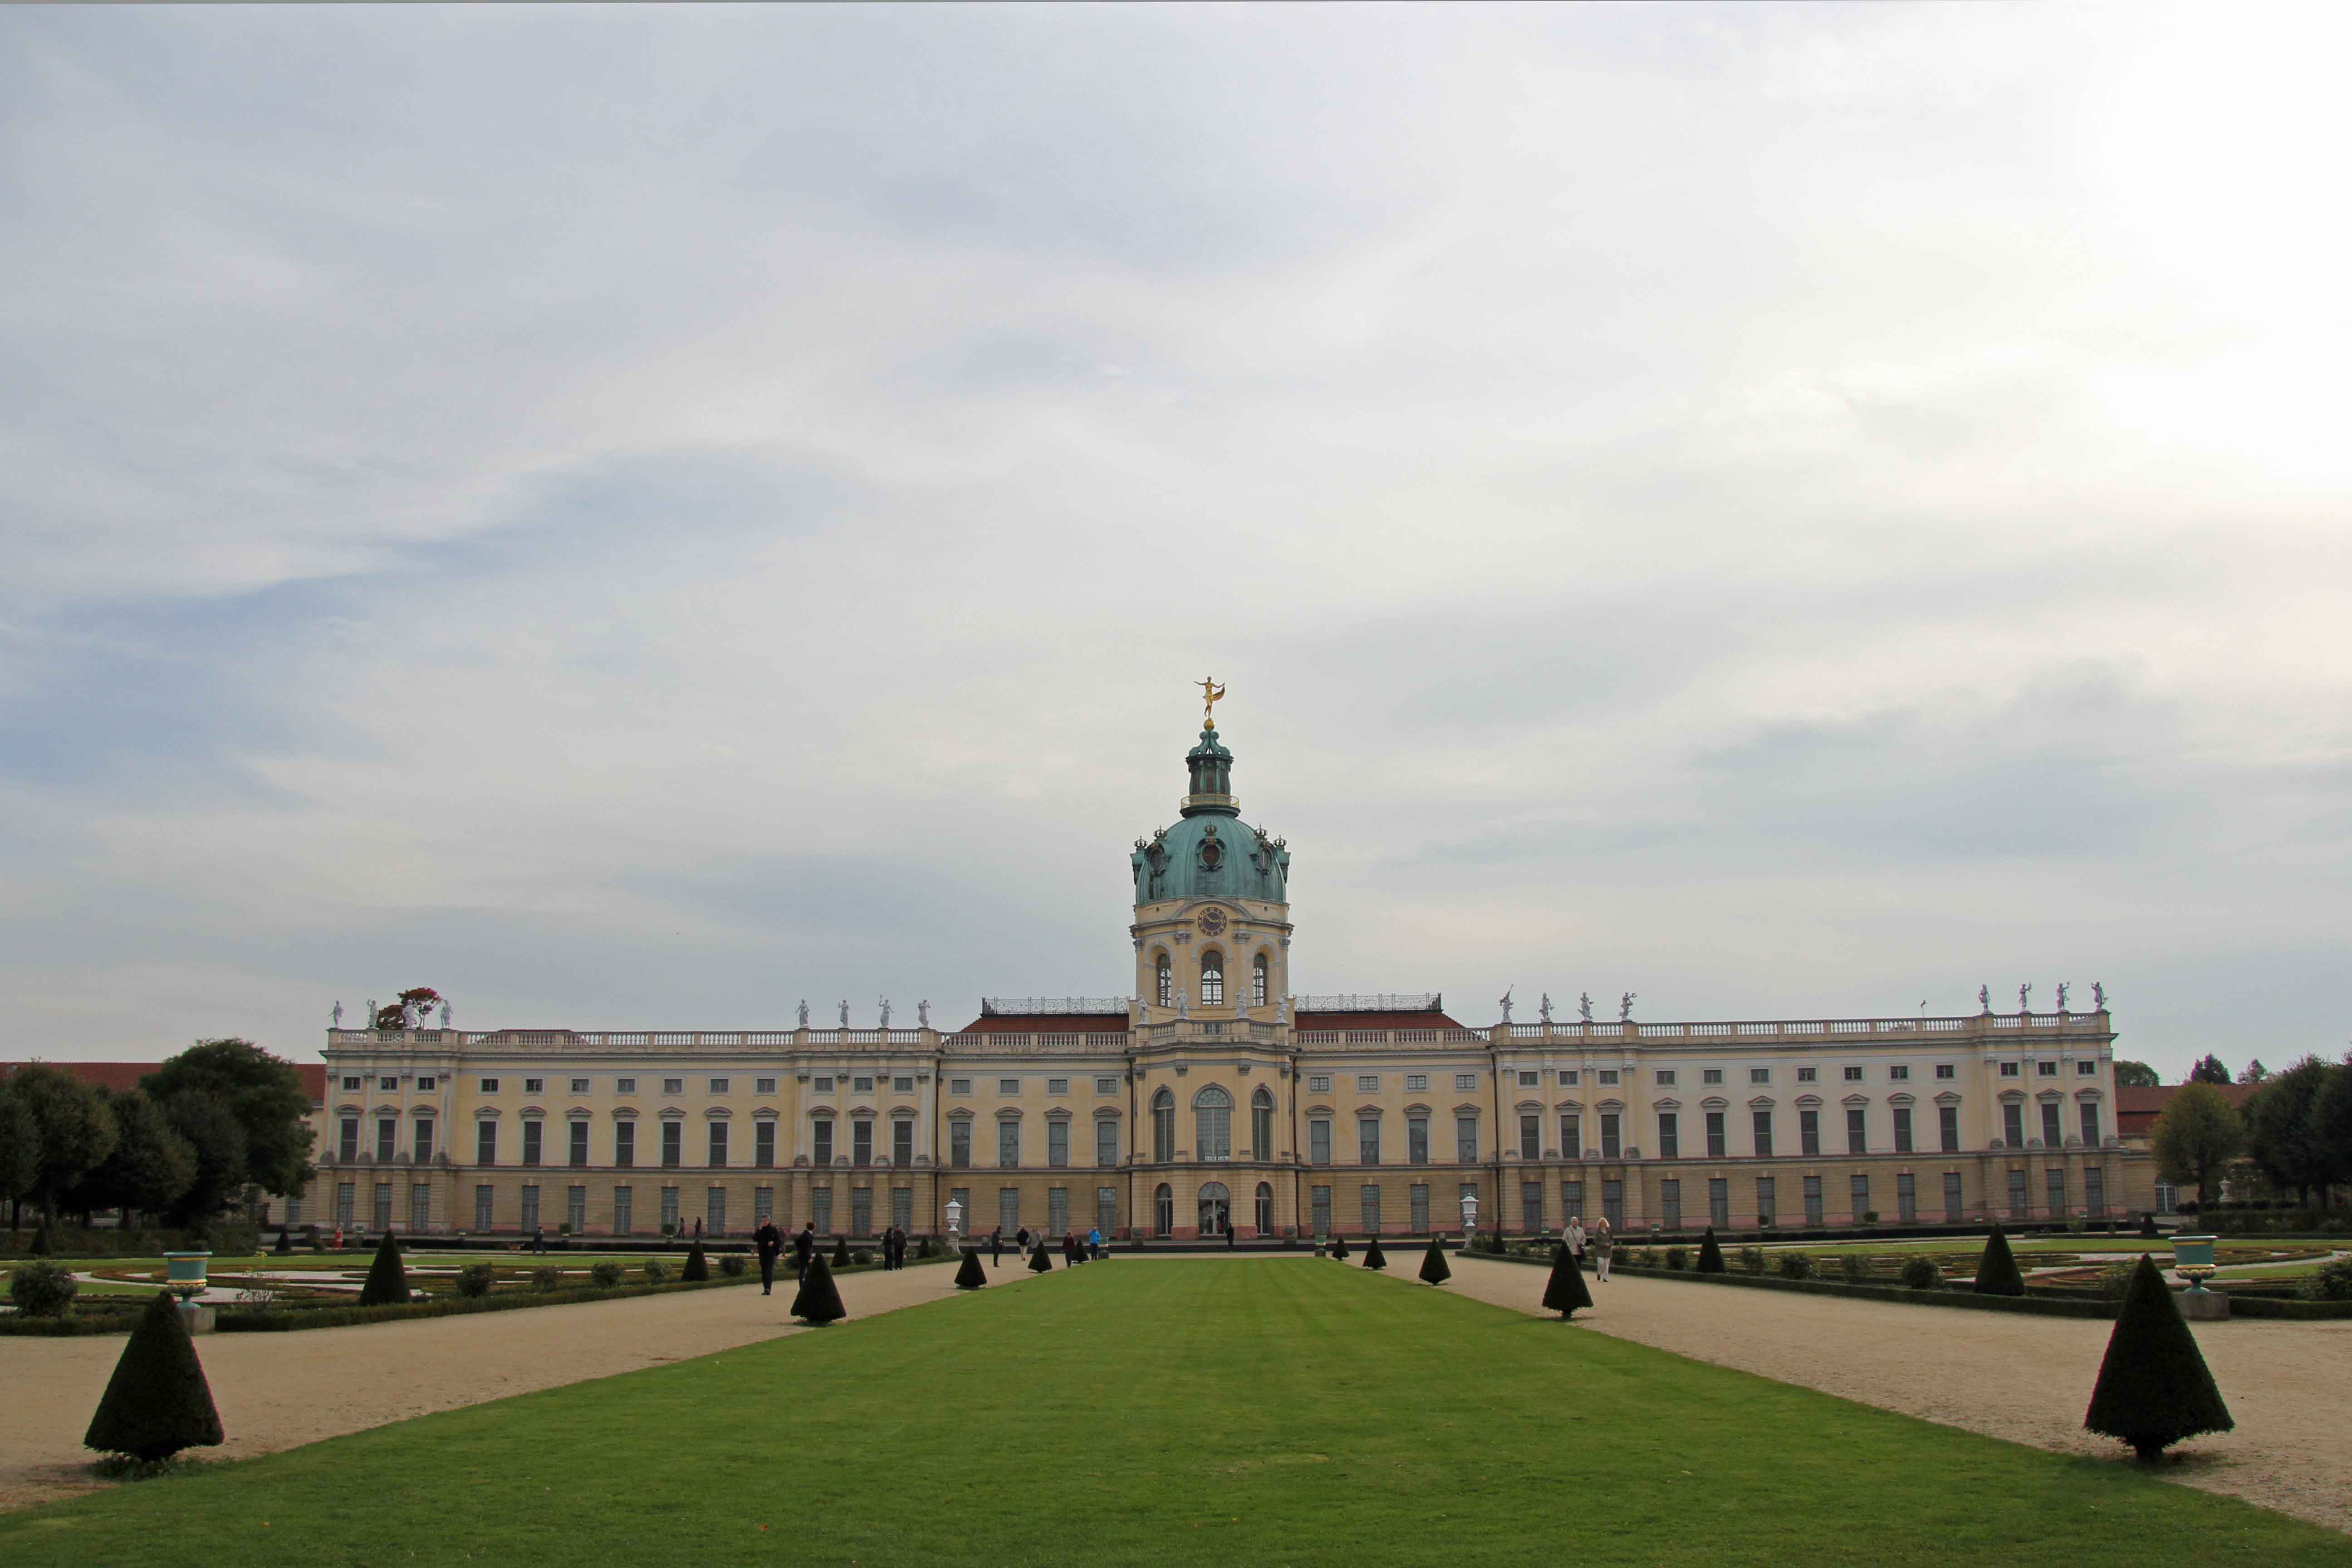 The rear view of Schloss Charlottenburg in Berlin seen from The Palace Gardens